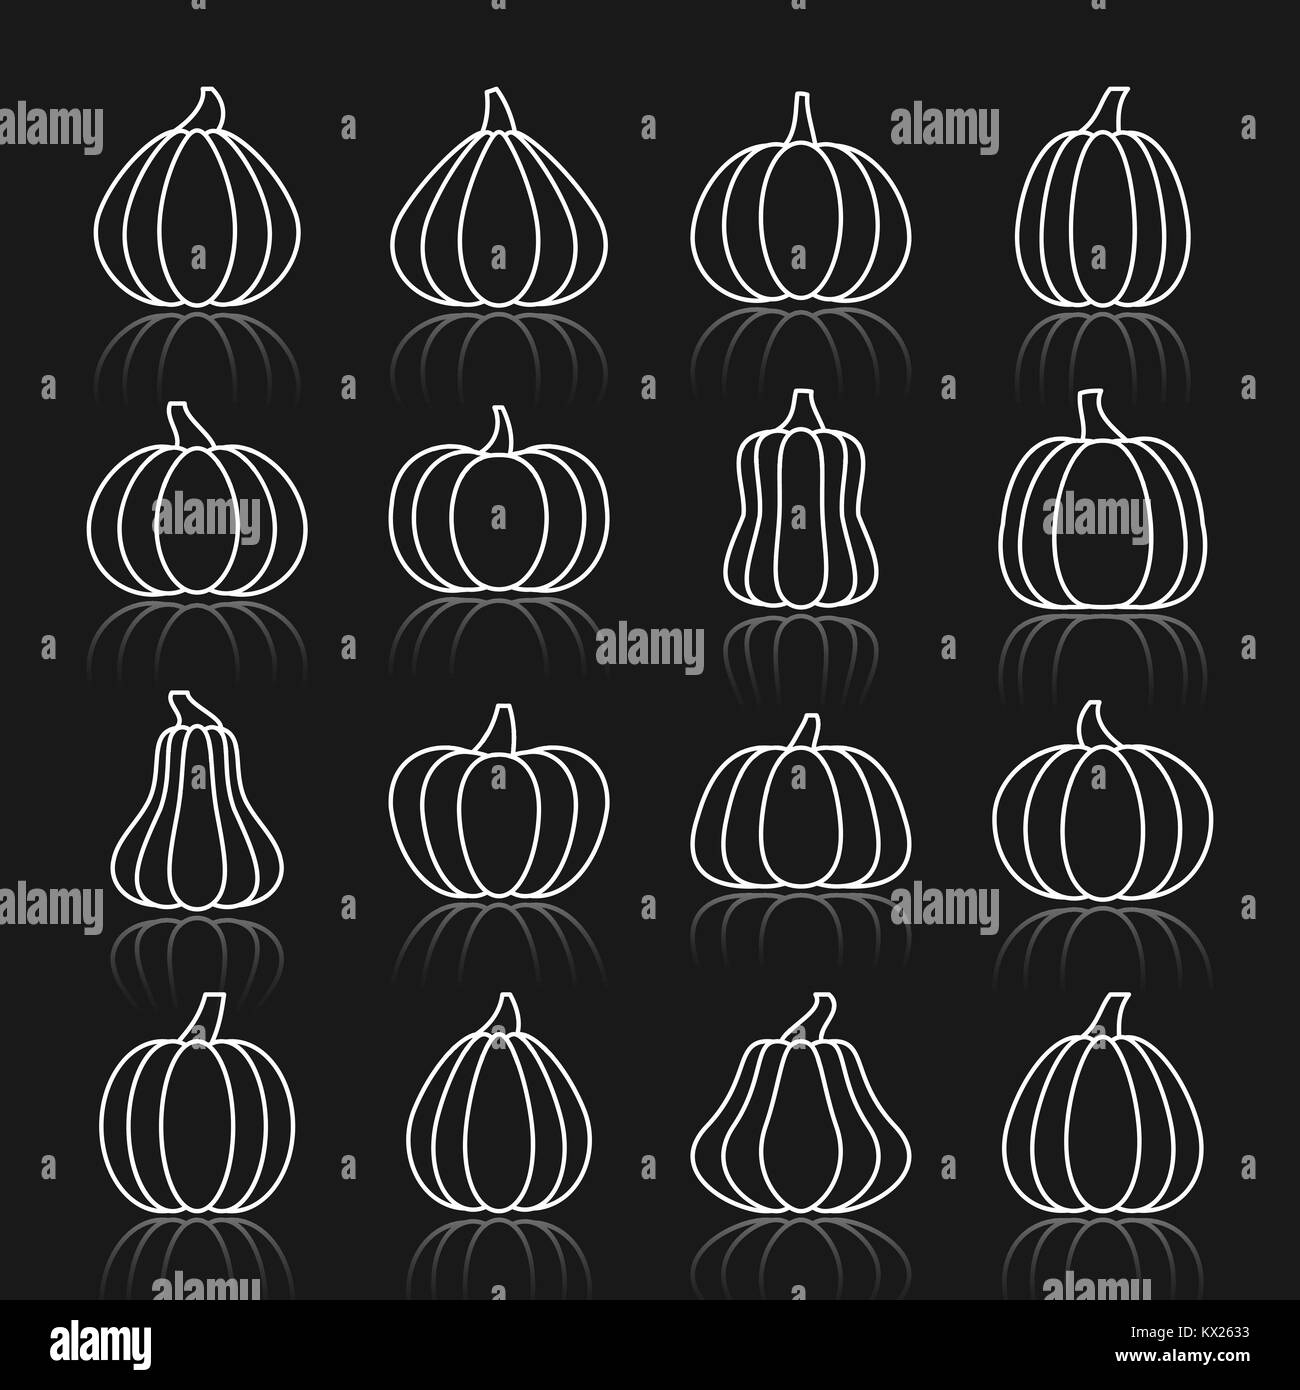 Pimpkin thin white line reflection icon set. Gourd vector linear symbol pack. Squash flat outline sign without fill. Simple pictogram graphic collecti Stock Vector